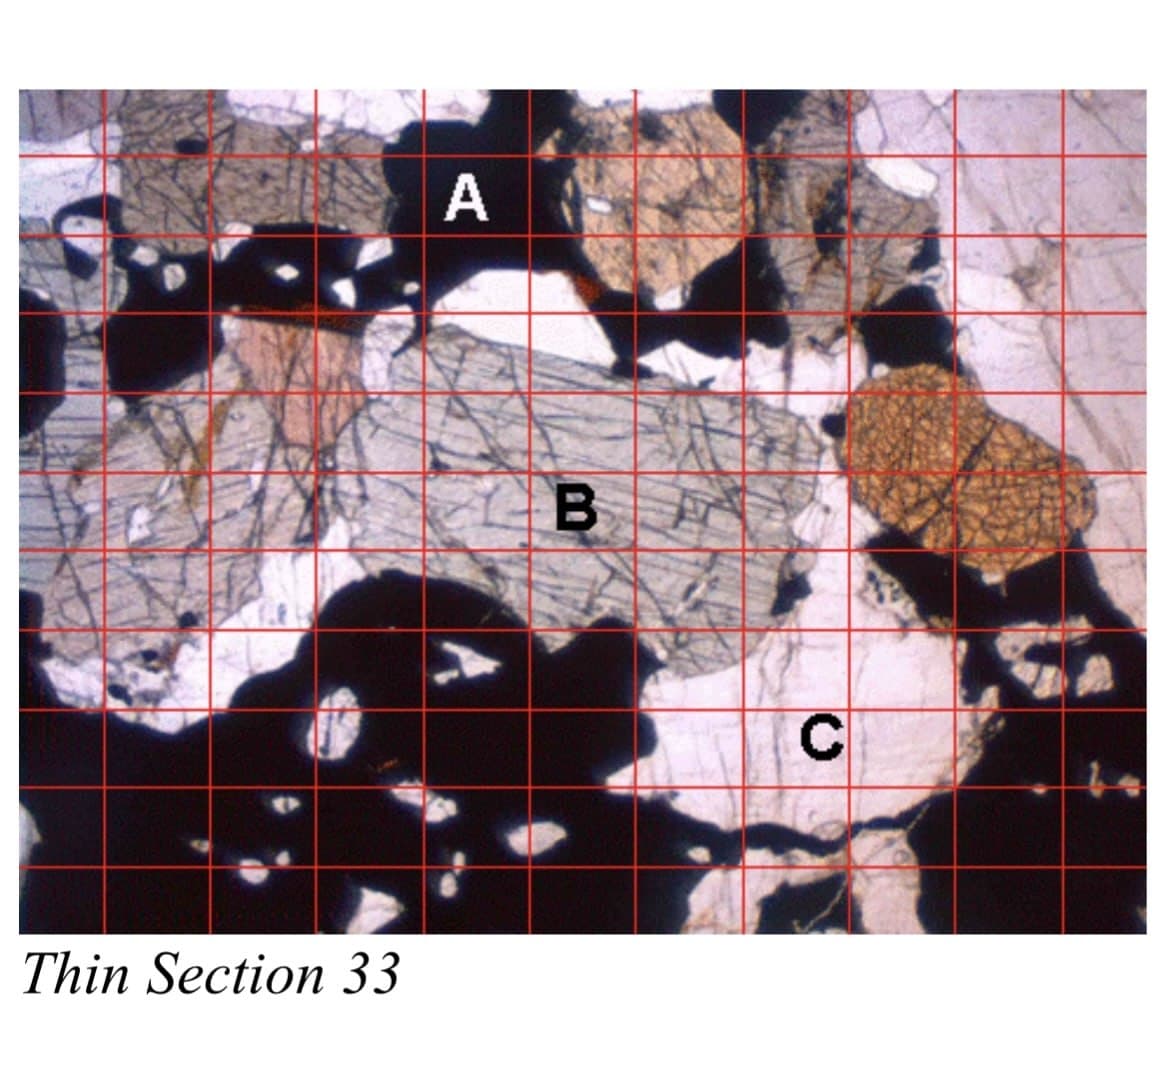 Thin Section 33
A
B